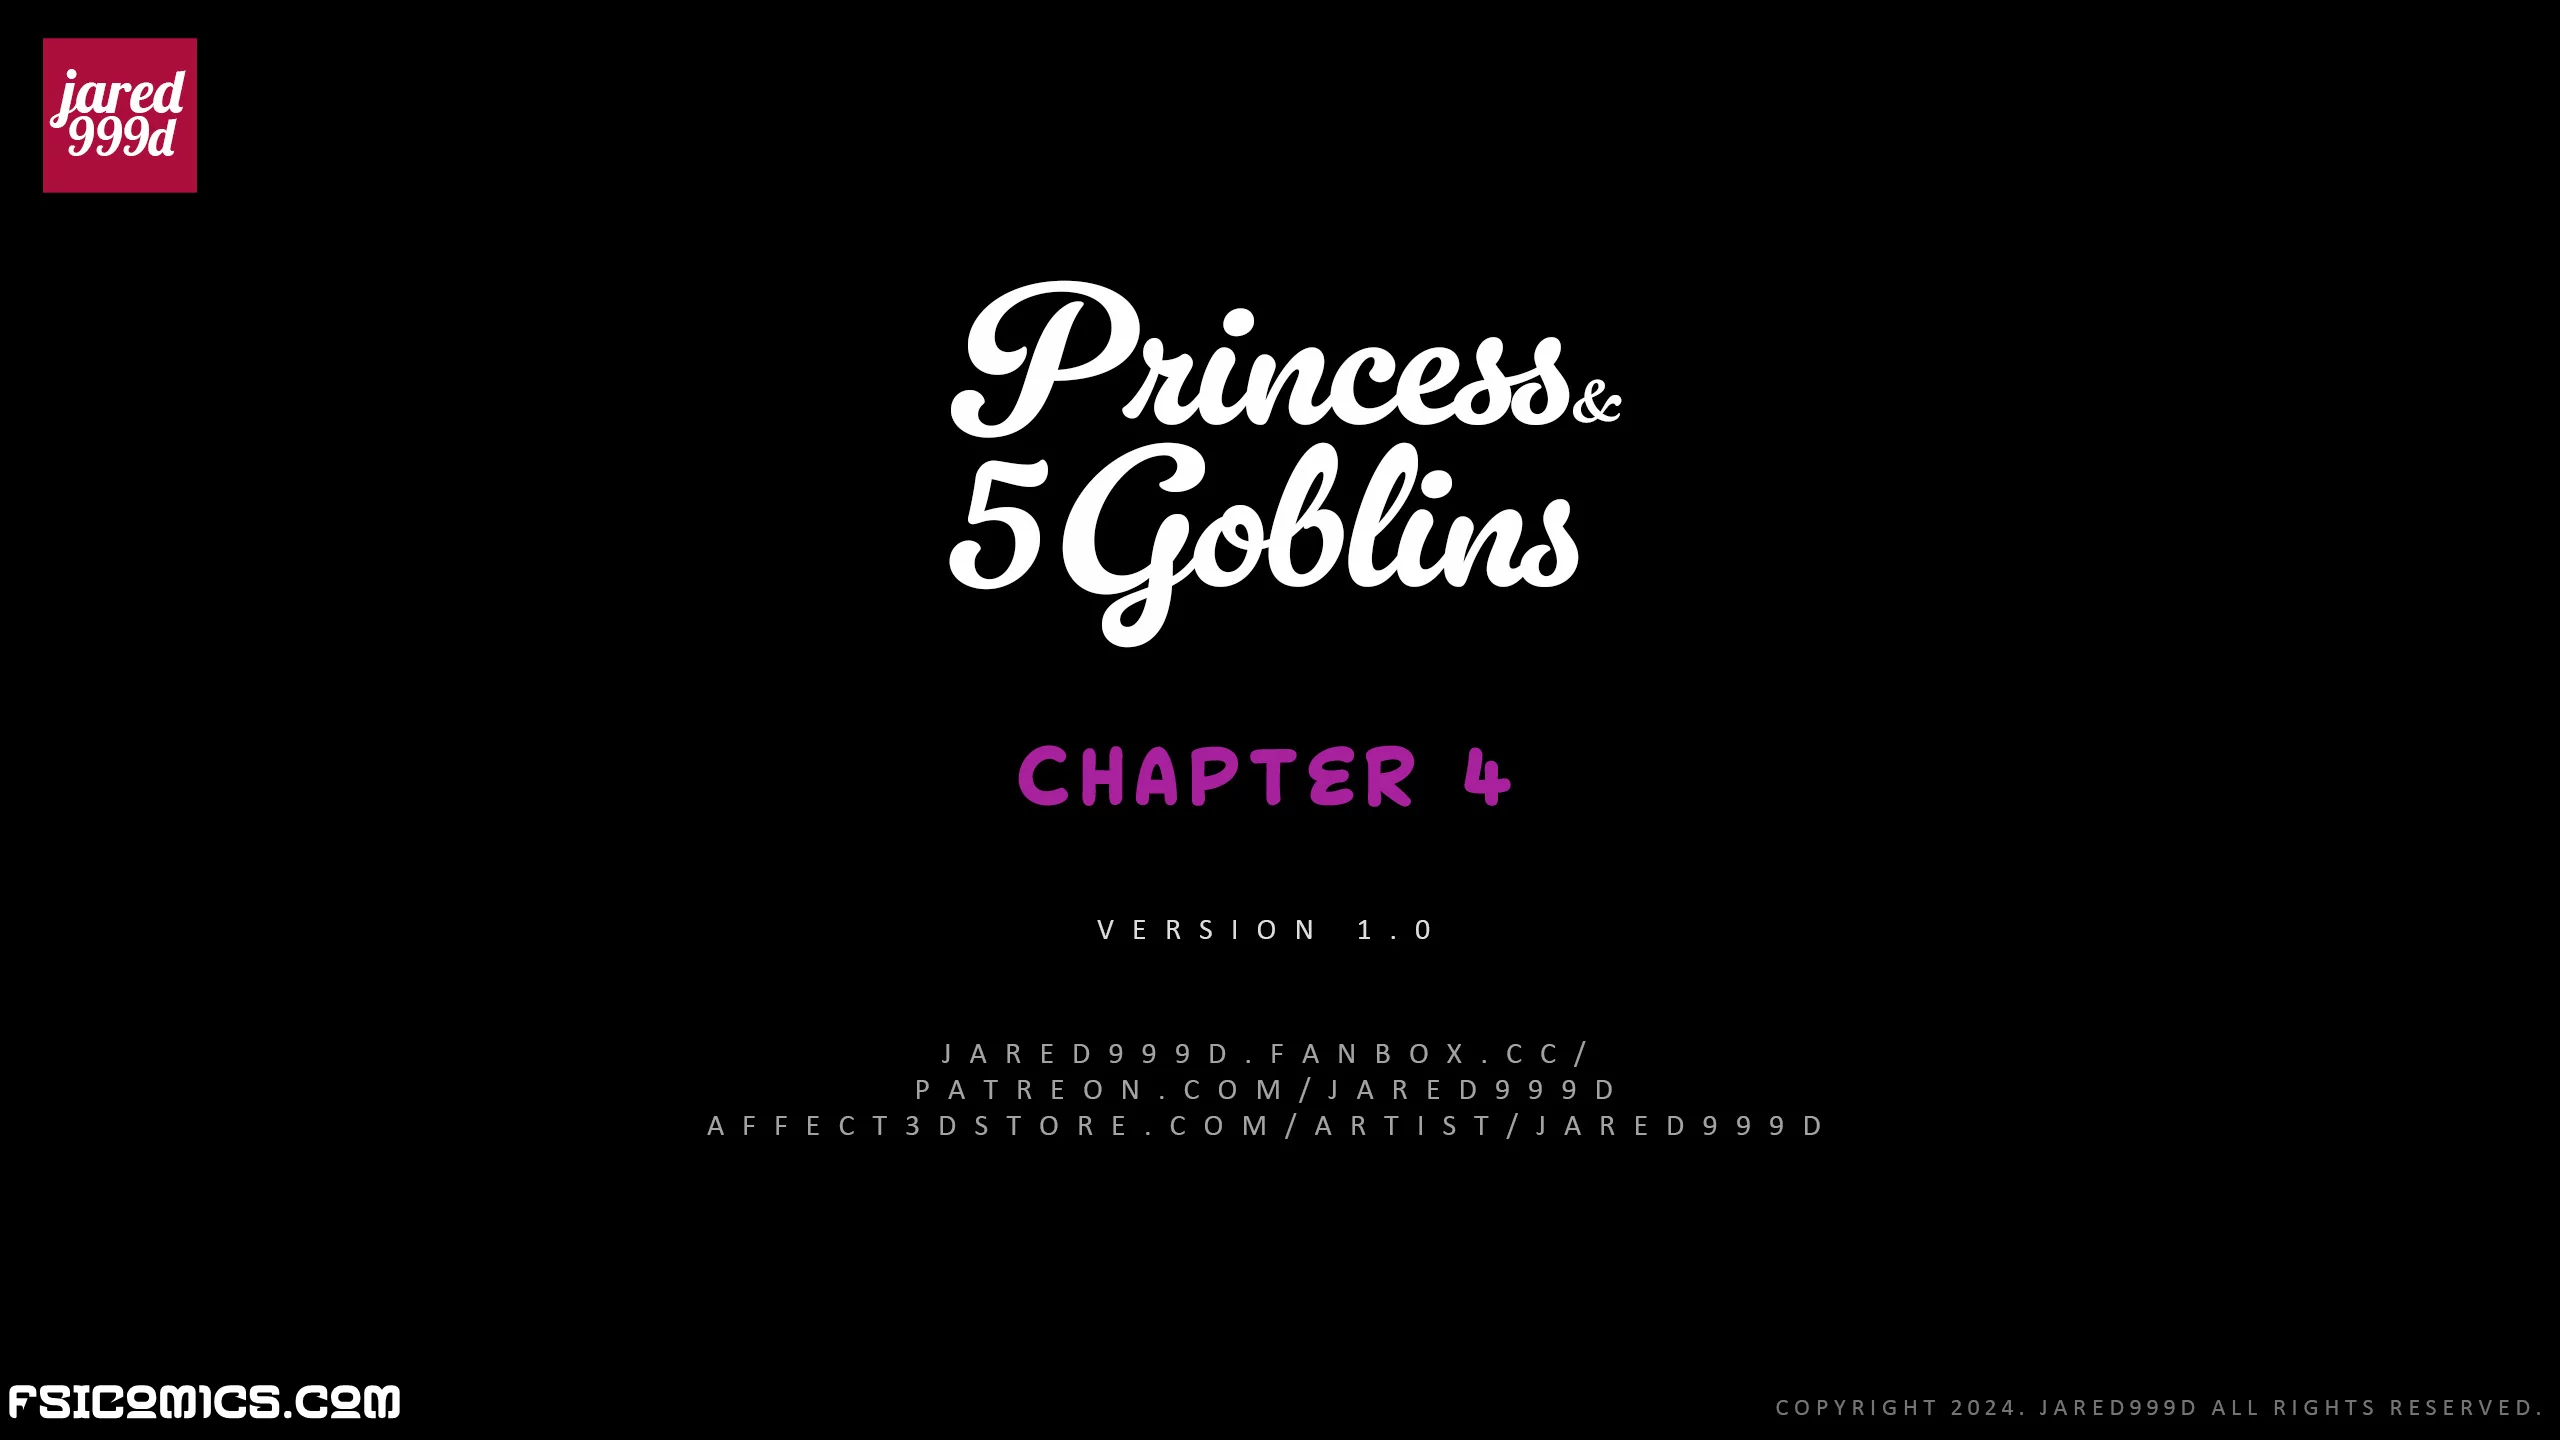 Princess And 5 Goblins Chapter 4 - Jared999D - 475 - FSIComics